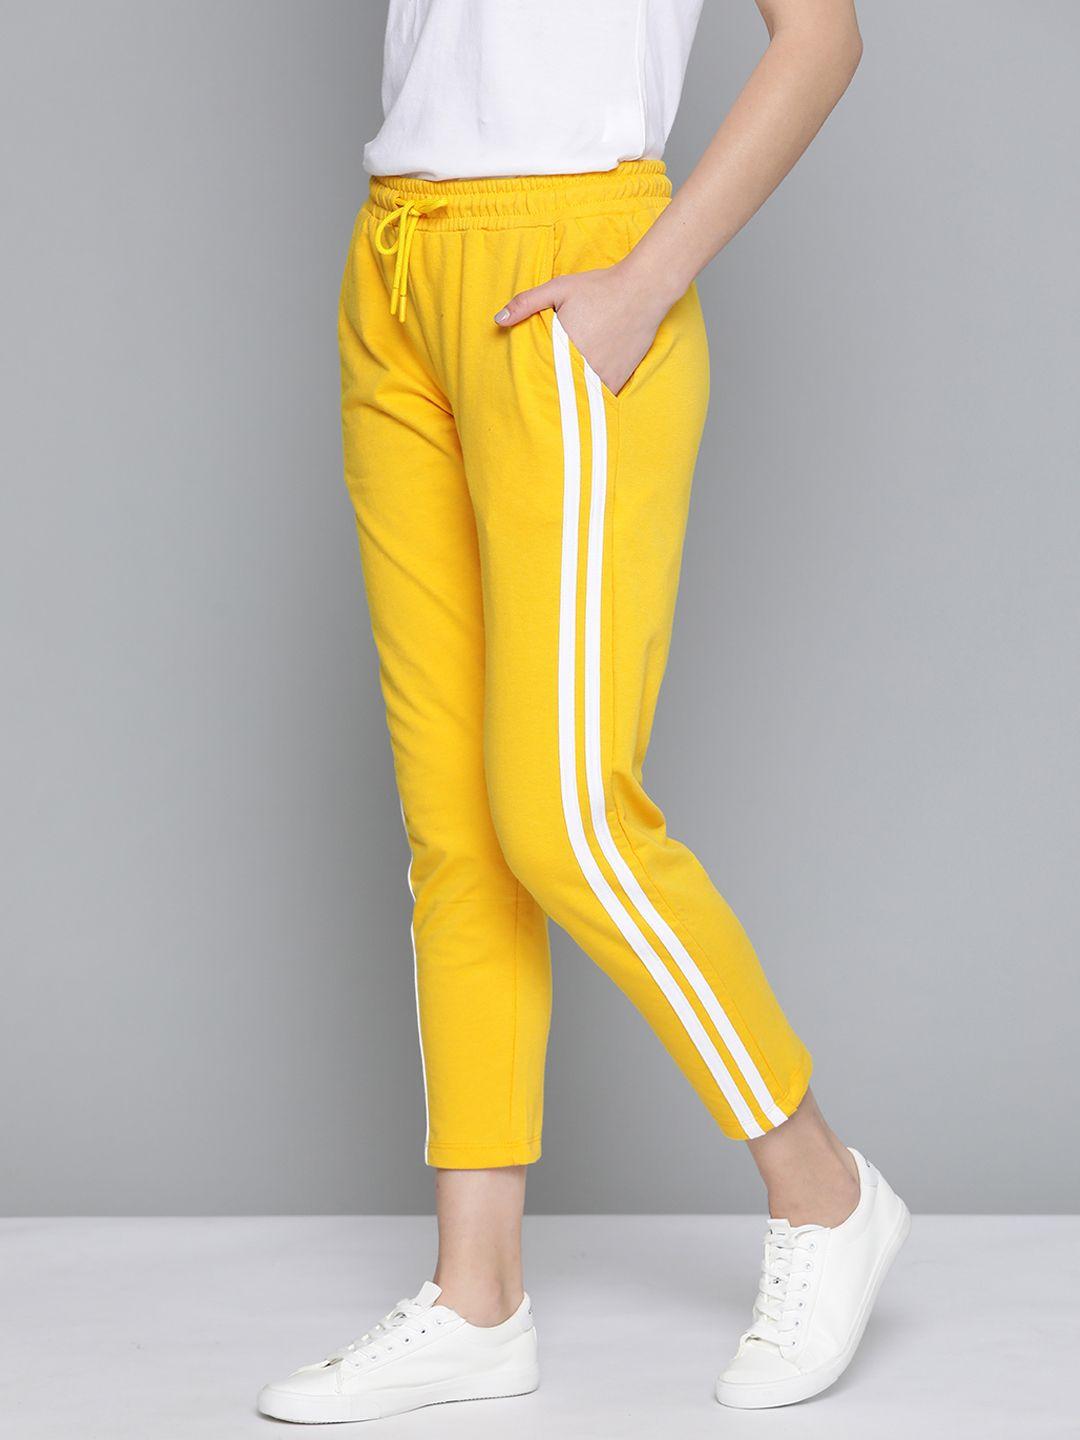 mast & harbour women yellow striped detail cropped track pants